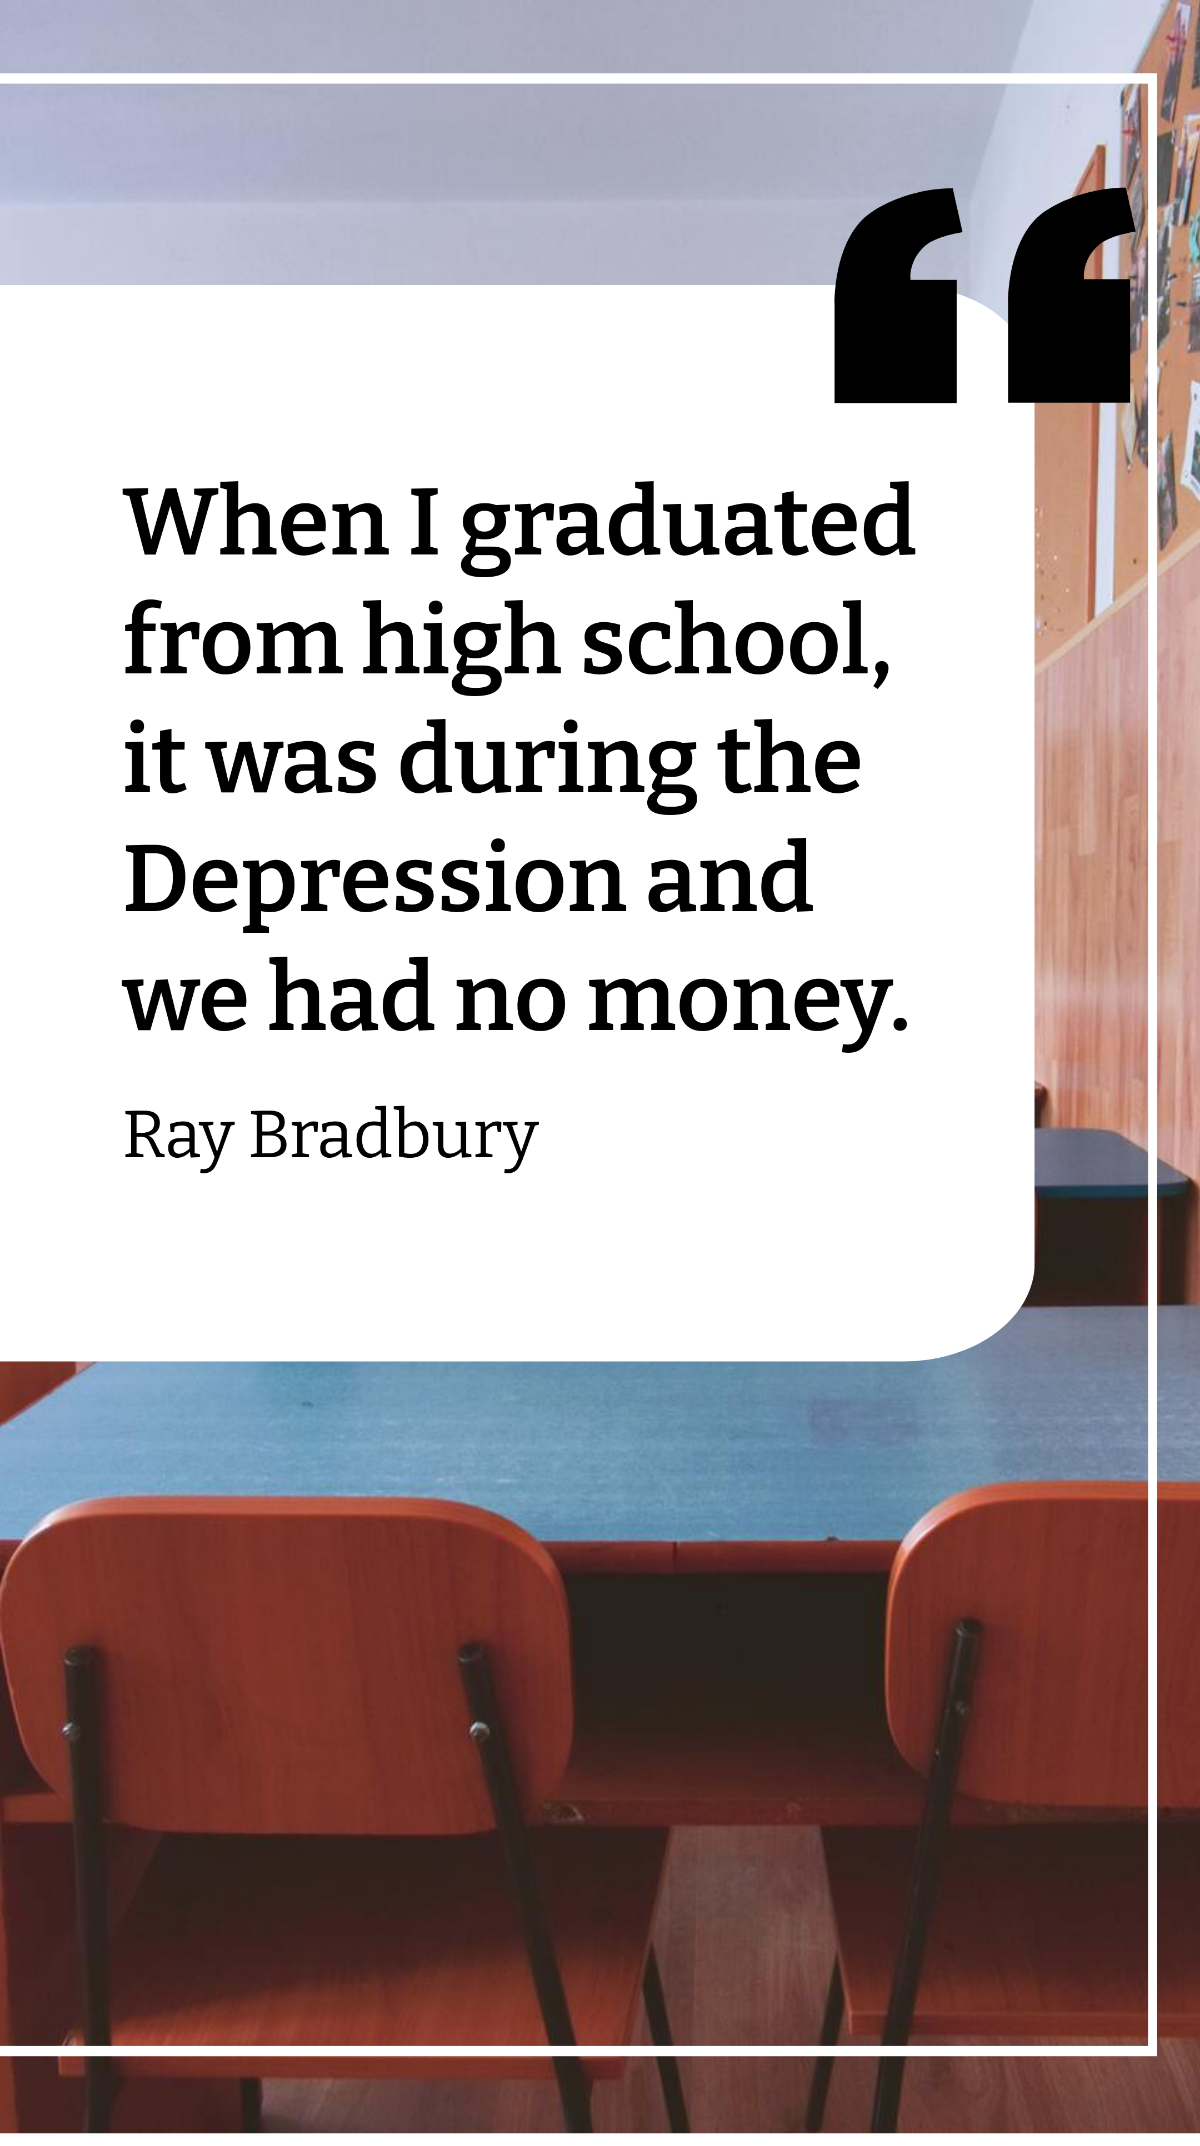 Ray Bradbury - When I graduated from high school, it was during the Depression and we had no money. Template